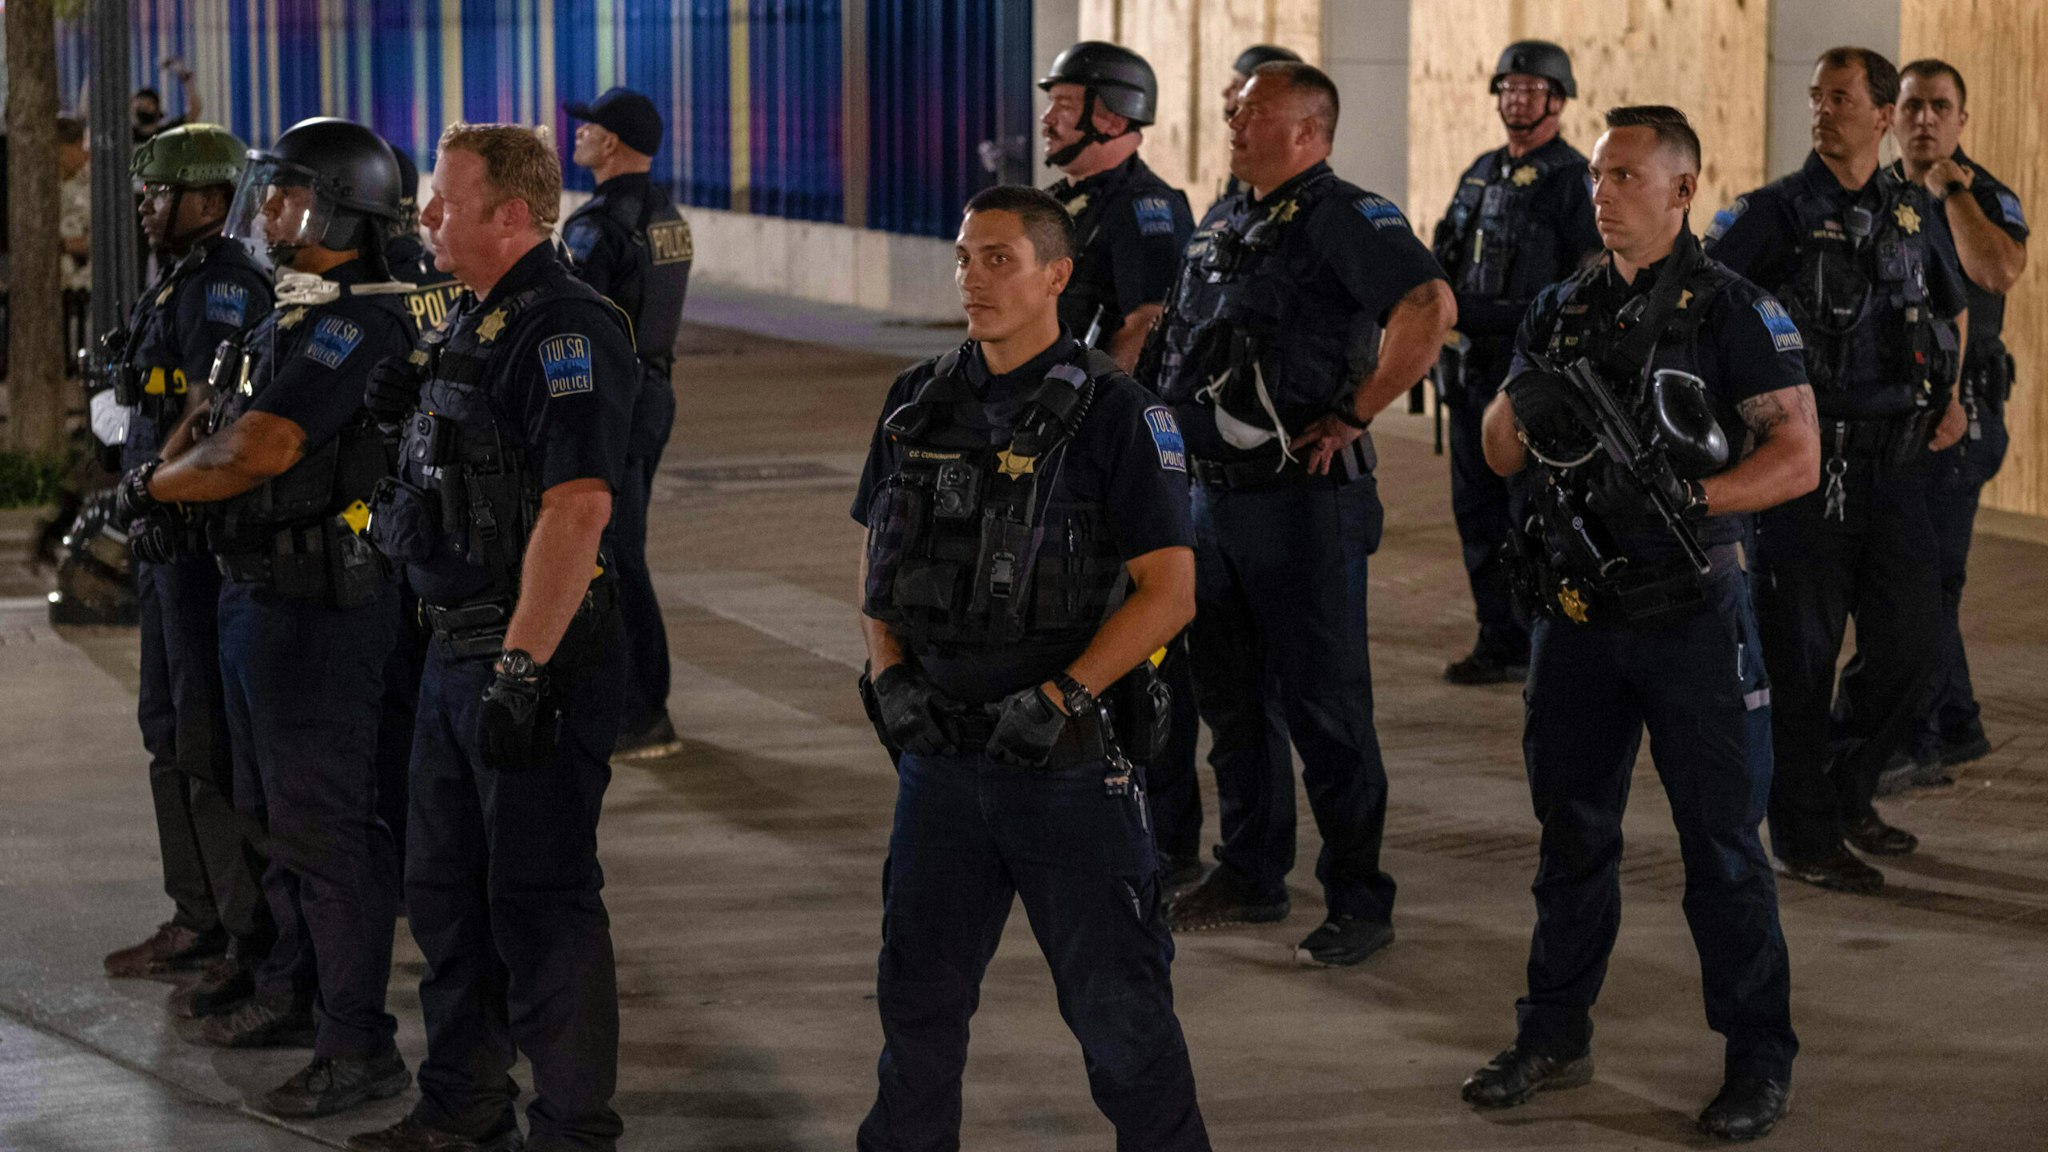 Tulsa Police Department officers stand in formation after leaving the area after shooting pepper balls at protesters as they marched and protested near the BOK Center in Tulsa, Oklahoma on June 20,2020 - Hundreds of supporters lined up early for Donald Trump's first political rally in months, saying the risk of contracting COVID-19 in a big, packed arena would not keep them from hearing the president's campaign message.